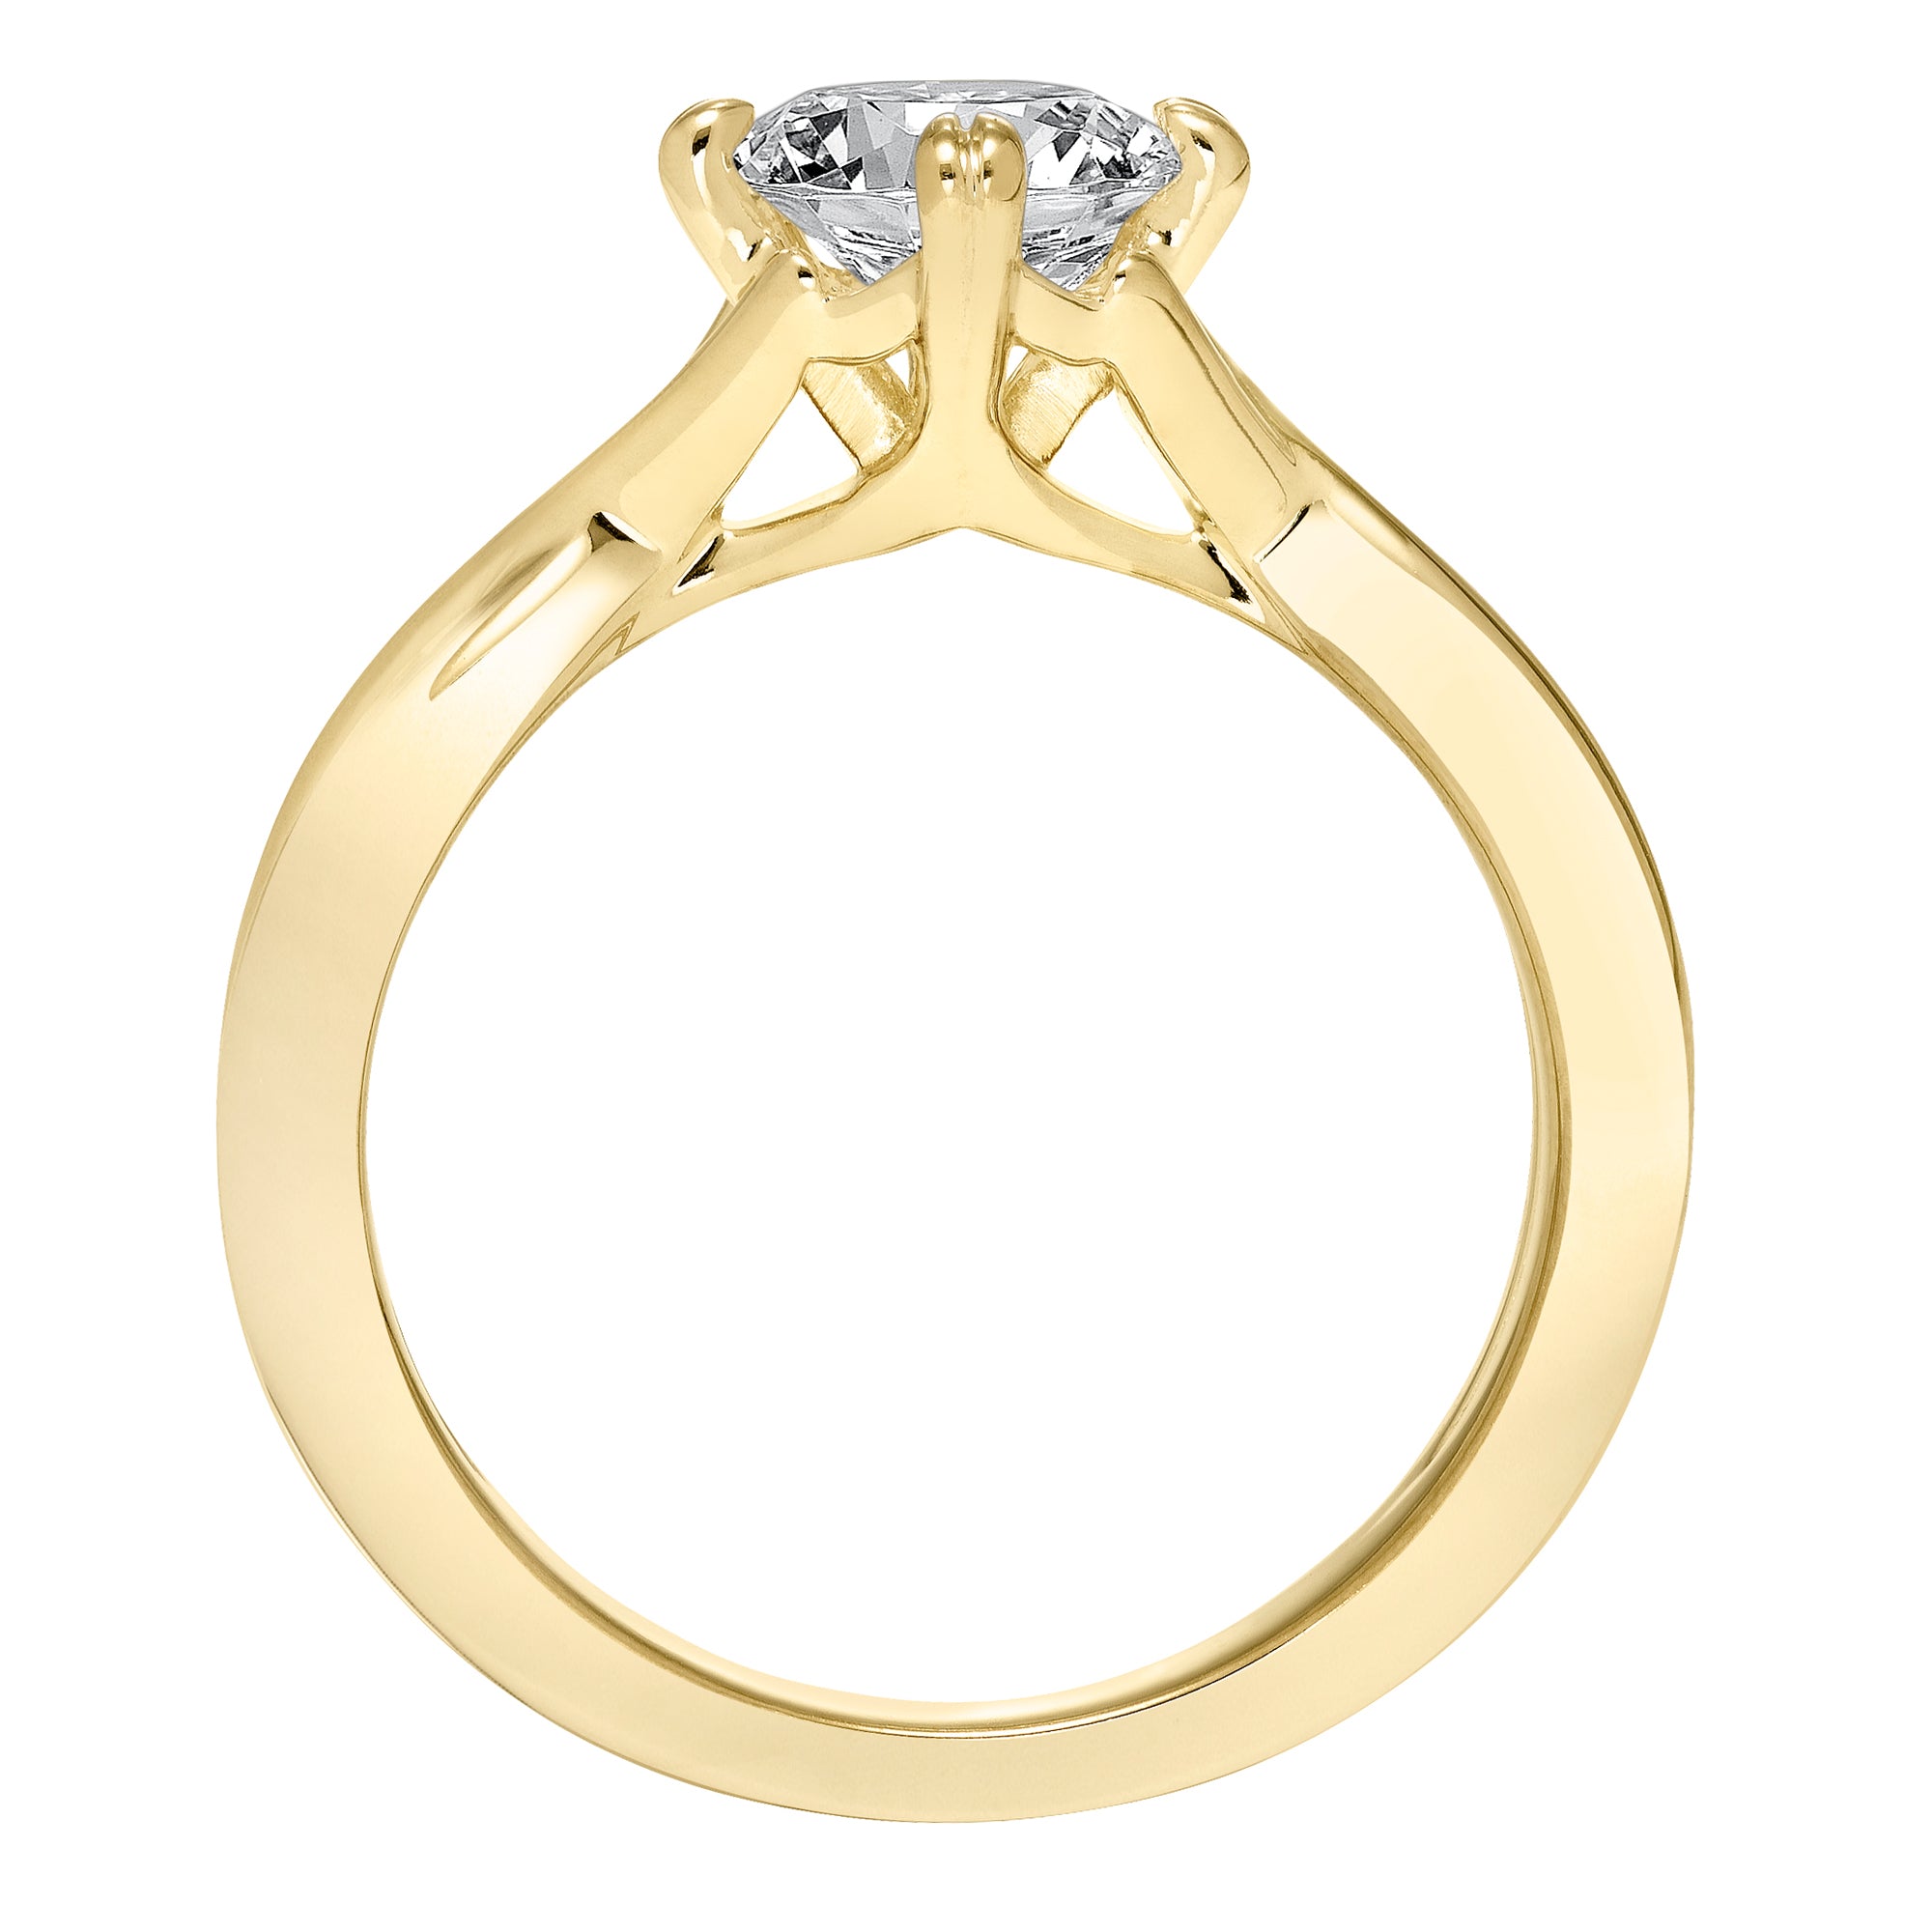 Artcarved Kennedy Diamond Setting in 14kt Yellow Gold